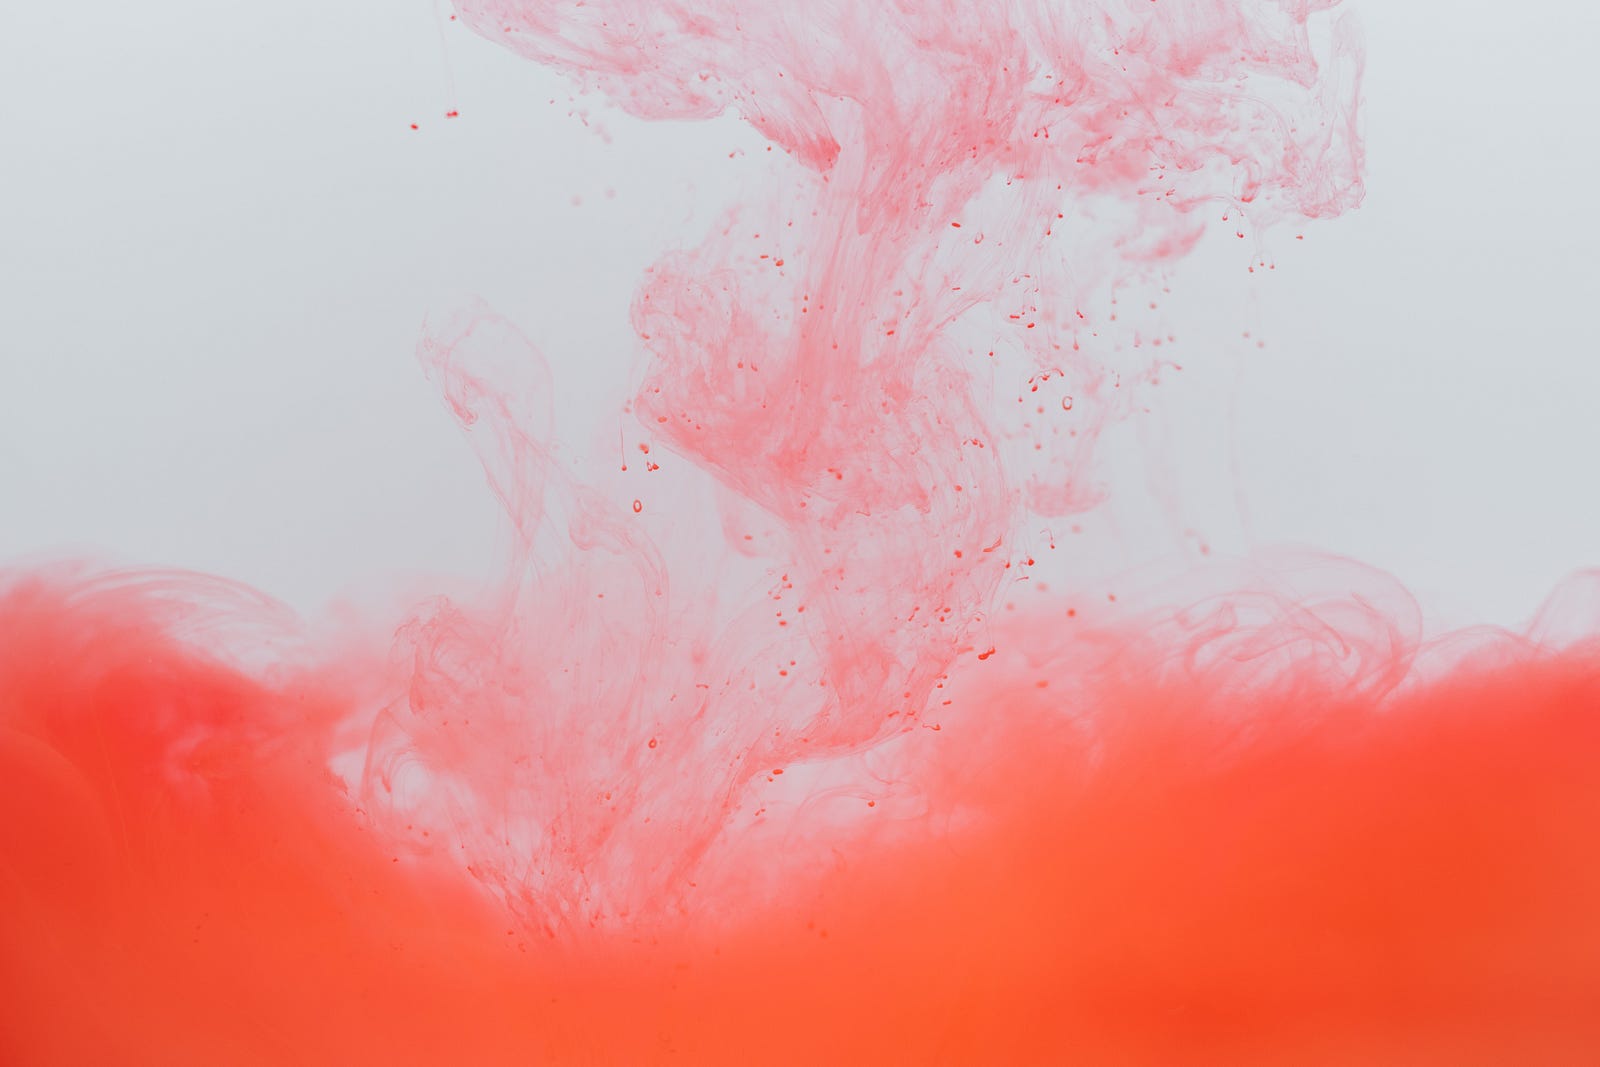 A painterly image of pinkish blood. The LDH blood test may someday be an indicator of a higher risk for suicide attempts.